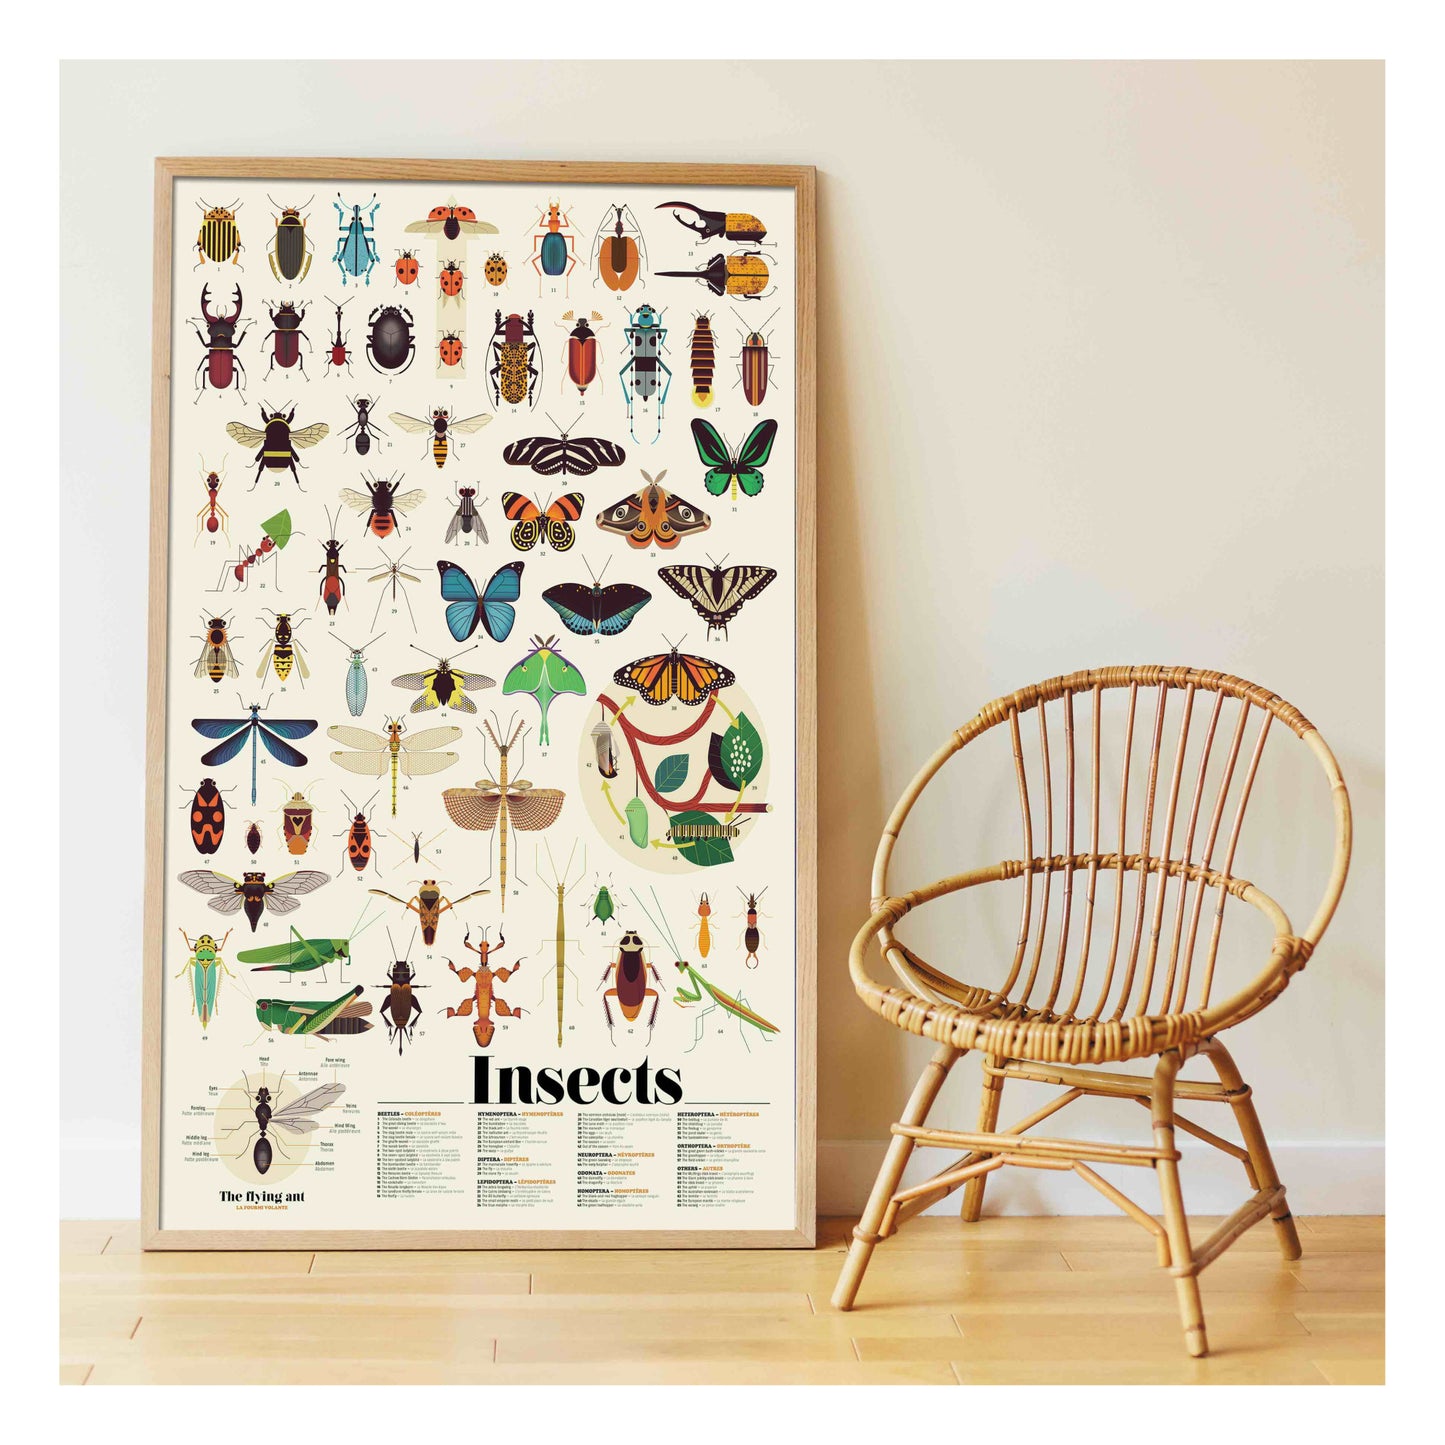 Poppik Creative Stickers - Insects